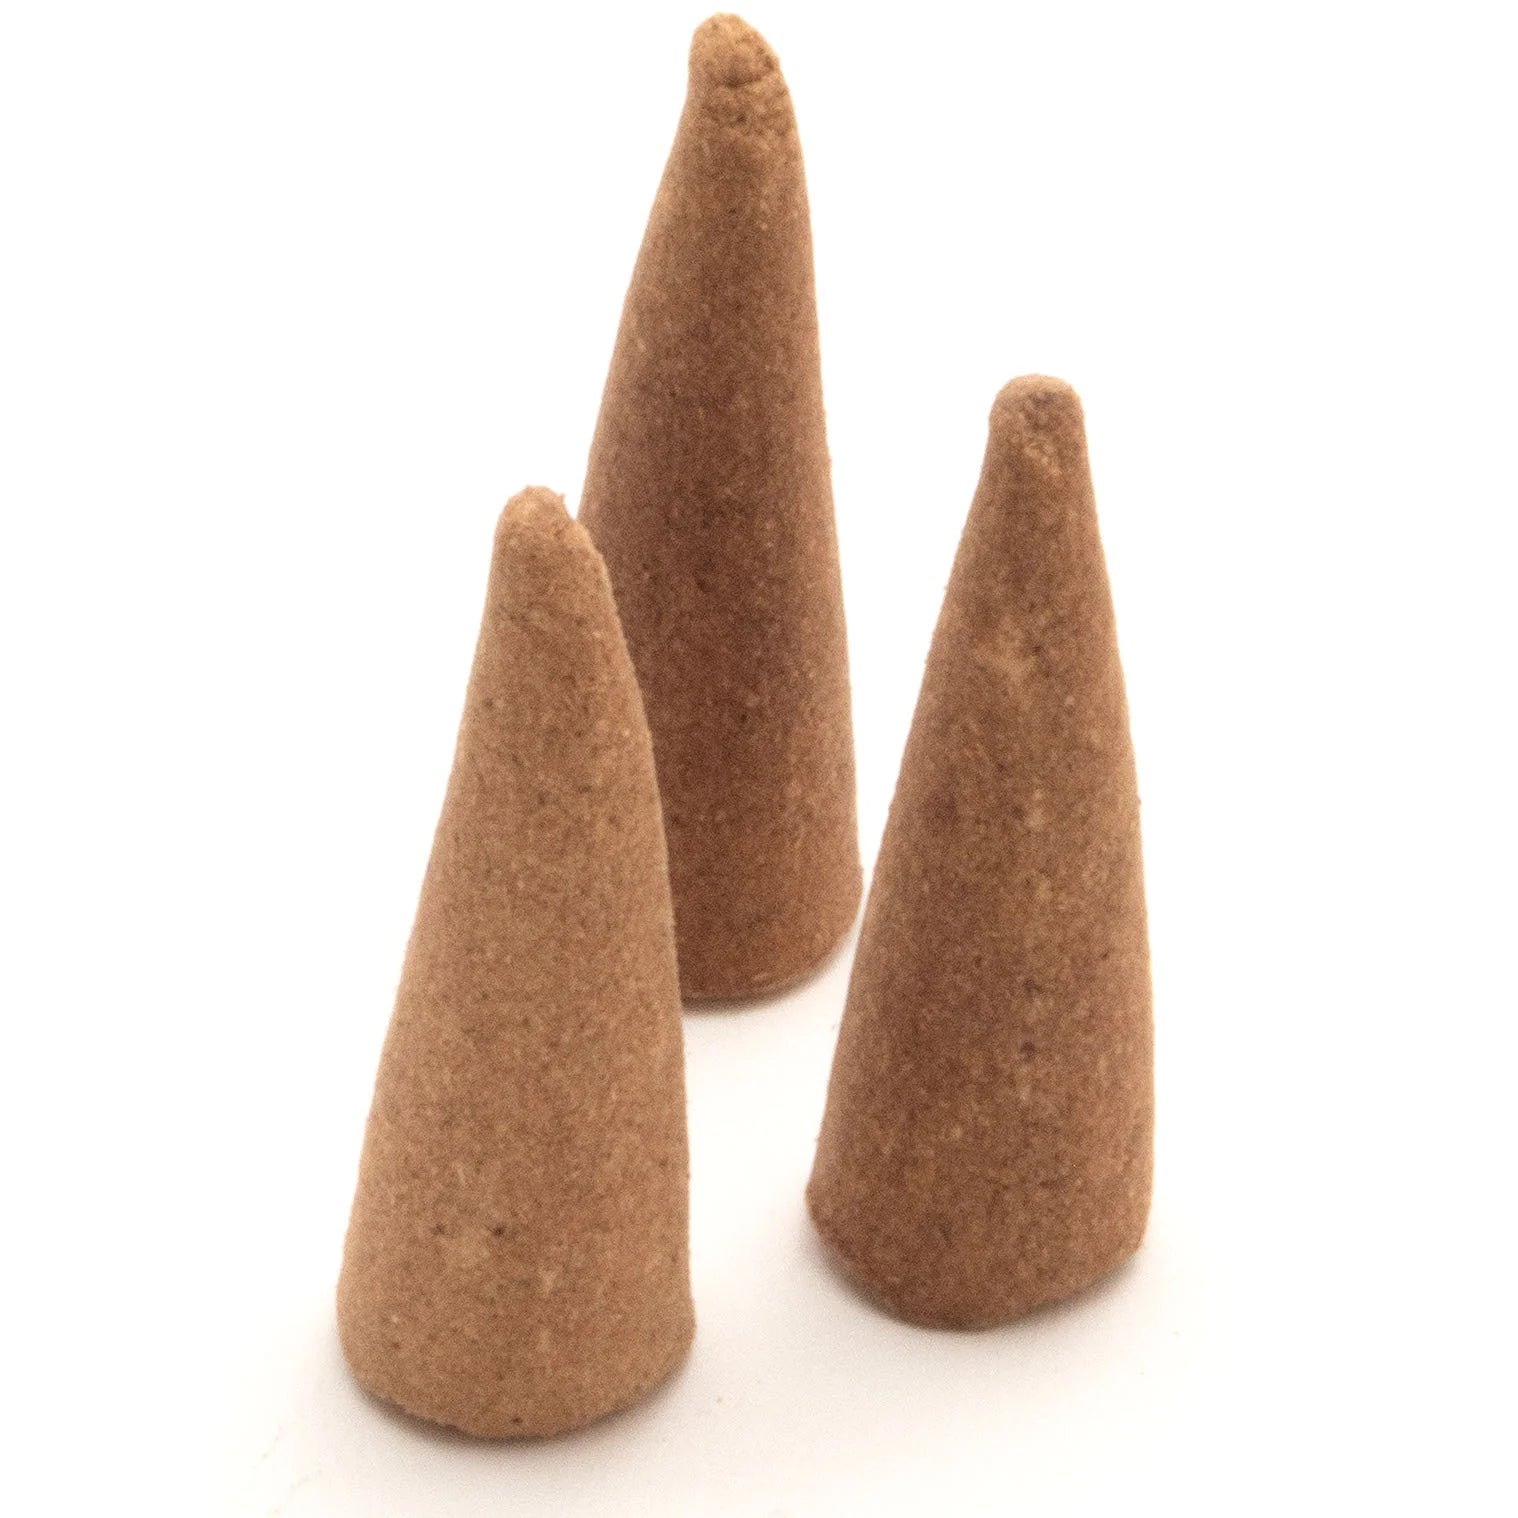 where to buy incense cones | where can i buy incense cones | Luxury Oud Incense Cones UK